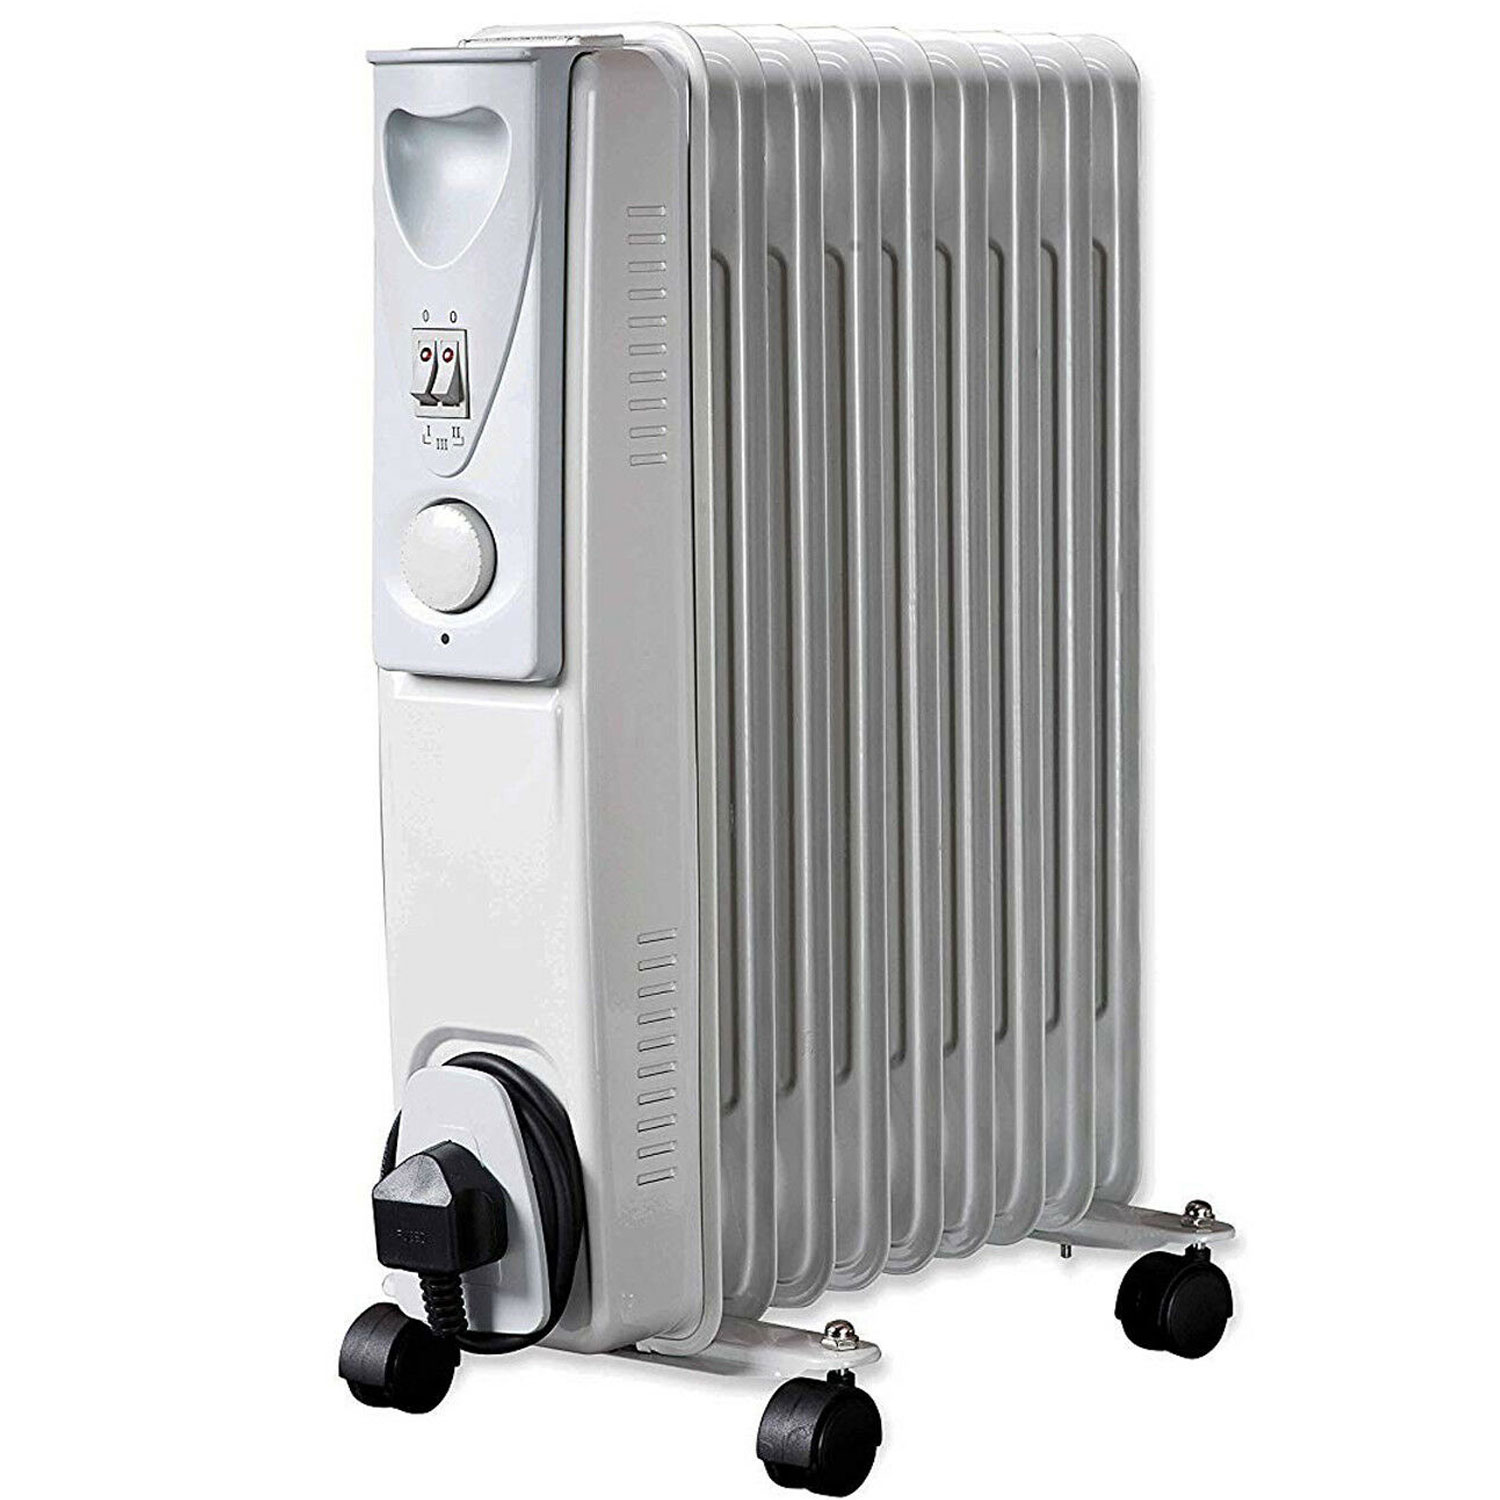 White Daewoo Oil Filled 1500W Portable Radiator with Thermostat and Temperature Control Ideal for Home Garage or Office 